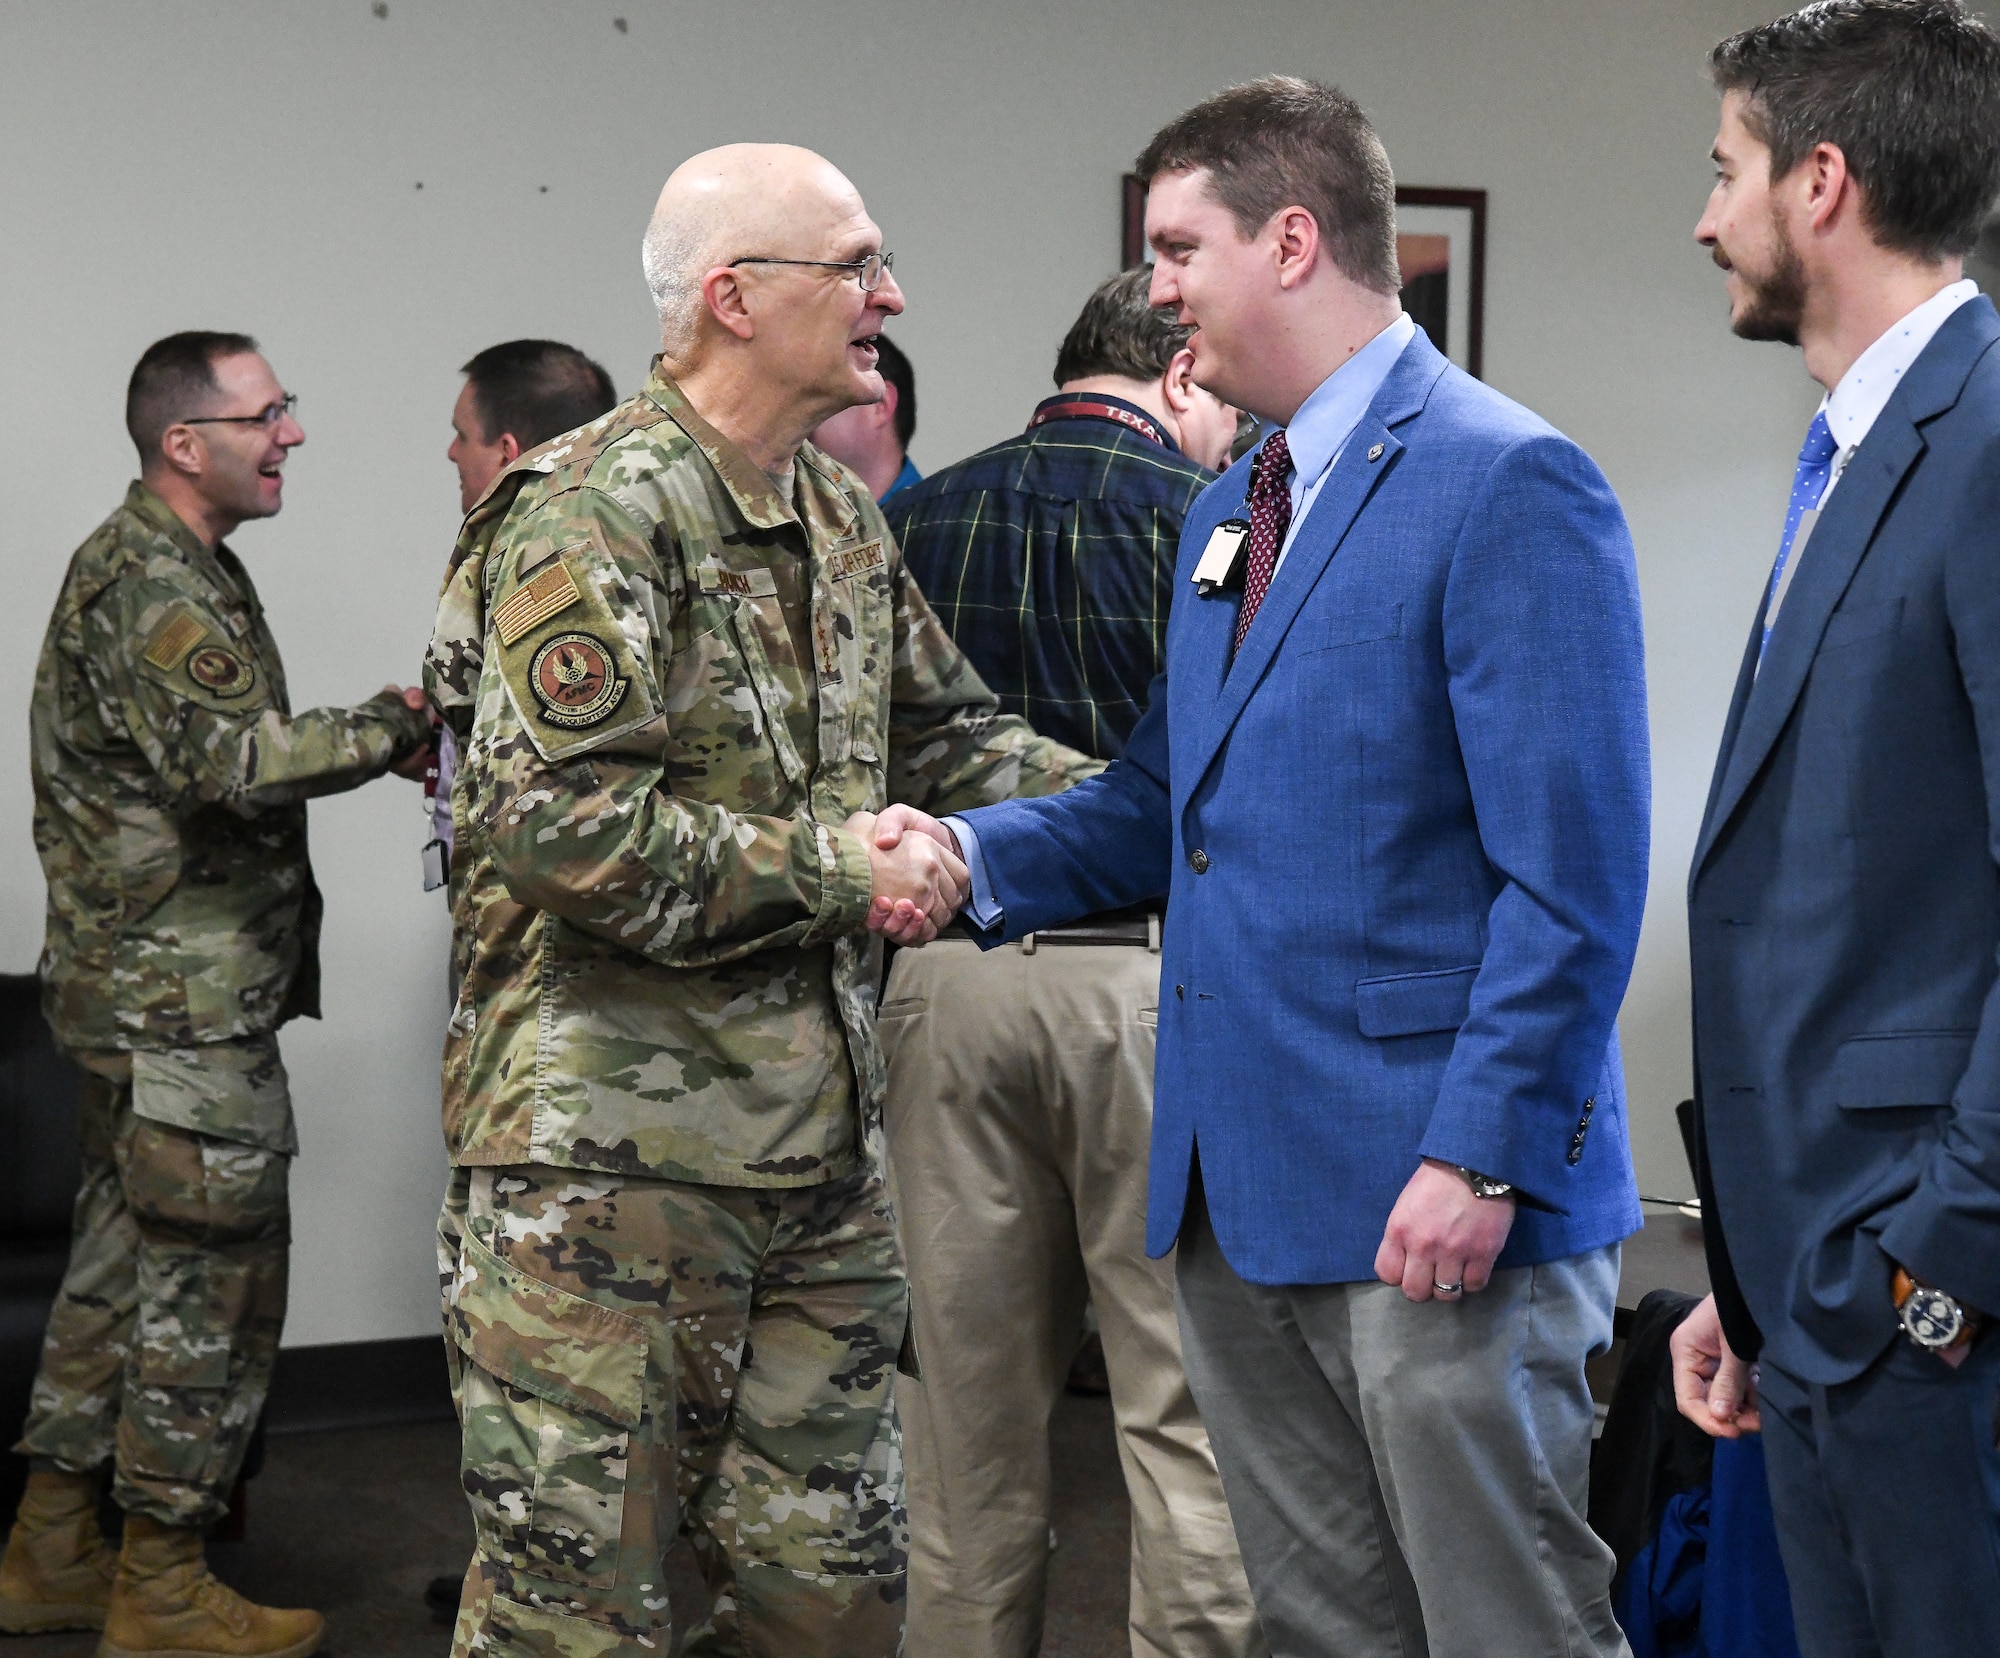 Gen. Arnold W. Bunch, Jr., commander, Air Force Materiel Command, shakes hands with John Claybrook, an Arnold Engineering Development Complex (AEDC) team member, Feb. 7, 2020, at Arnold Air Force Base, Tenn. Bunch had breakfast with AEDC team members and fielded questions. (U.S. Air Force photo by Jill Pickett) (This image has been altered by obscuring badges for security purposes.)